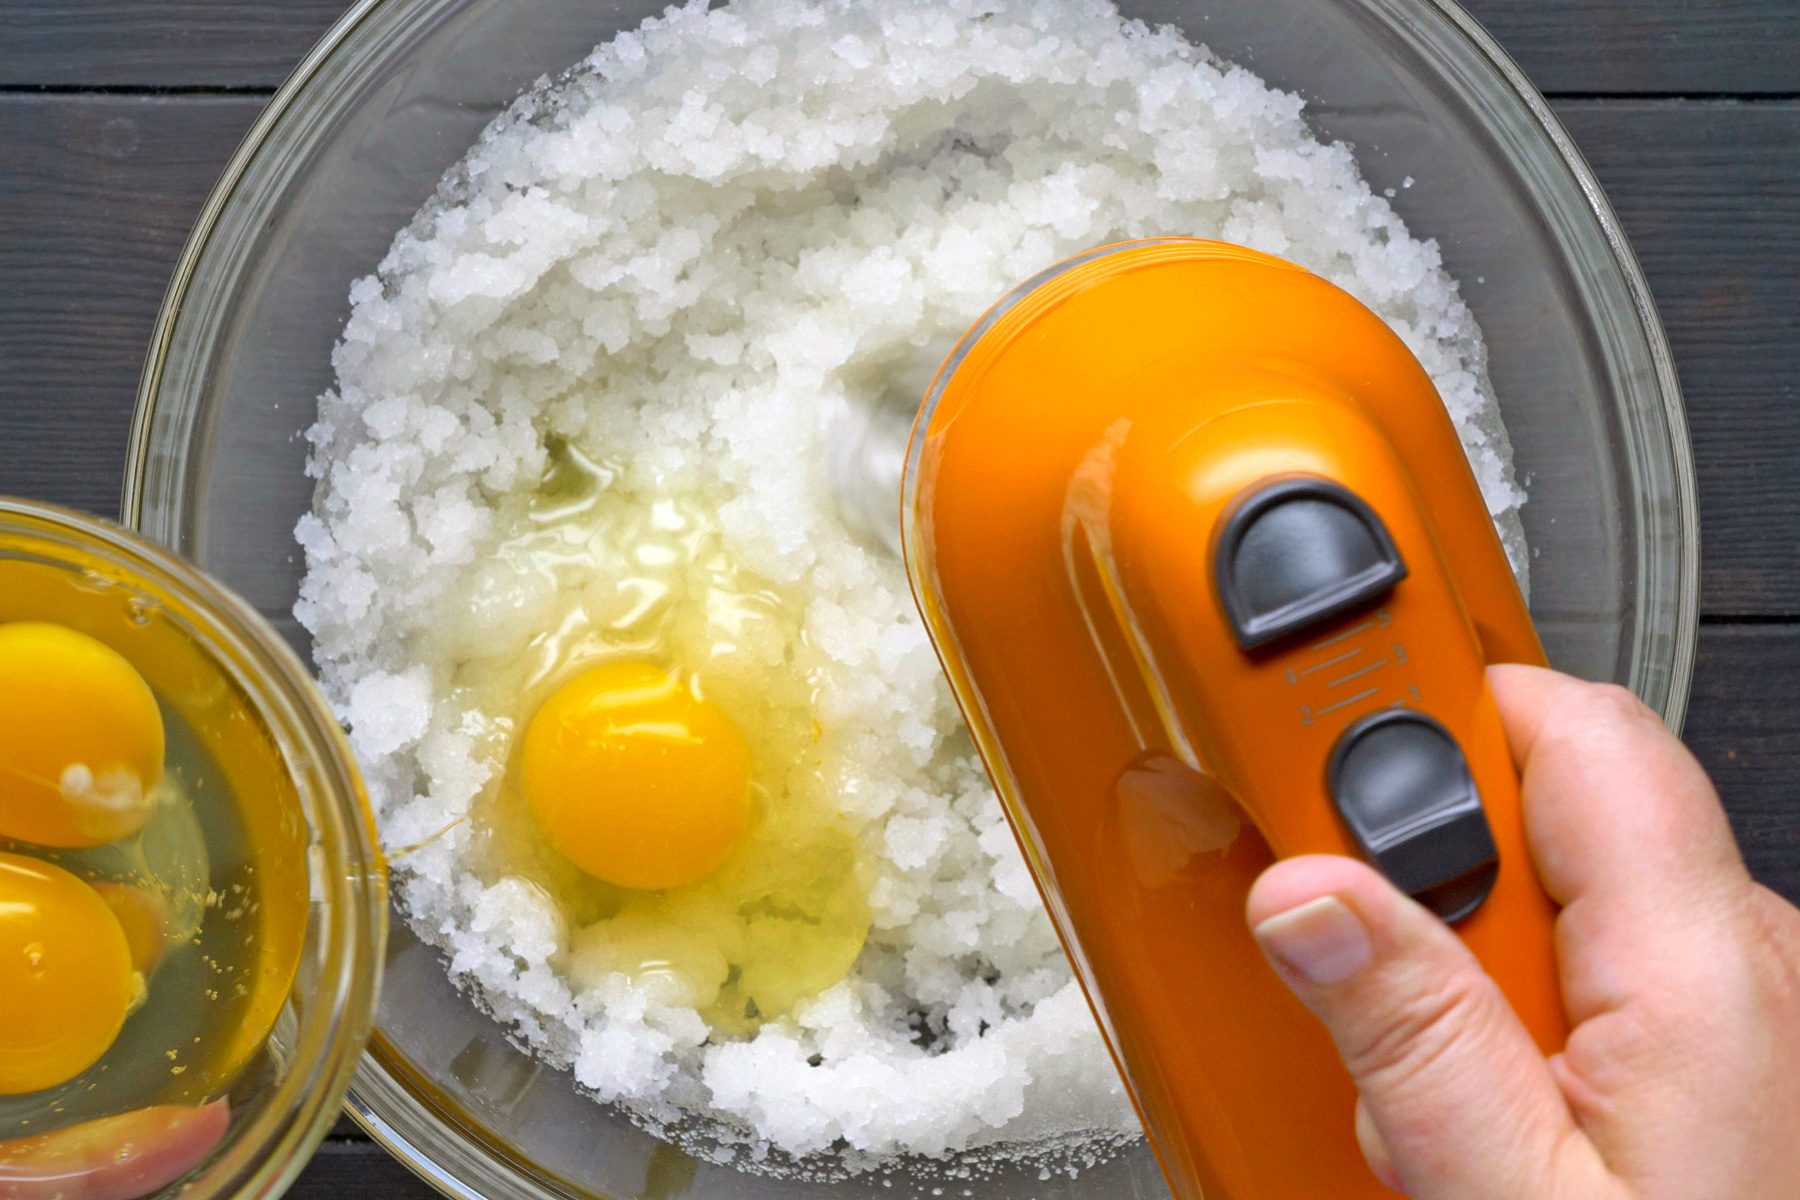 A hand beating eggs with the mixture of other ingredients in a bowl